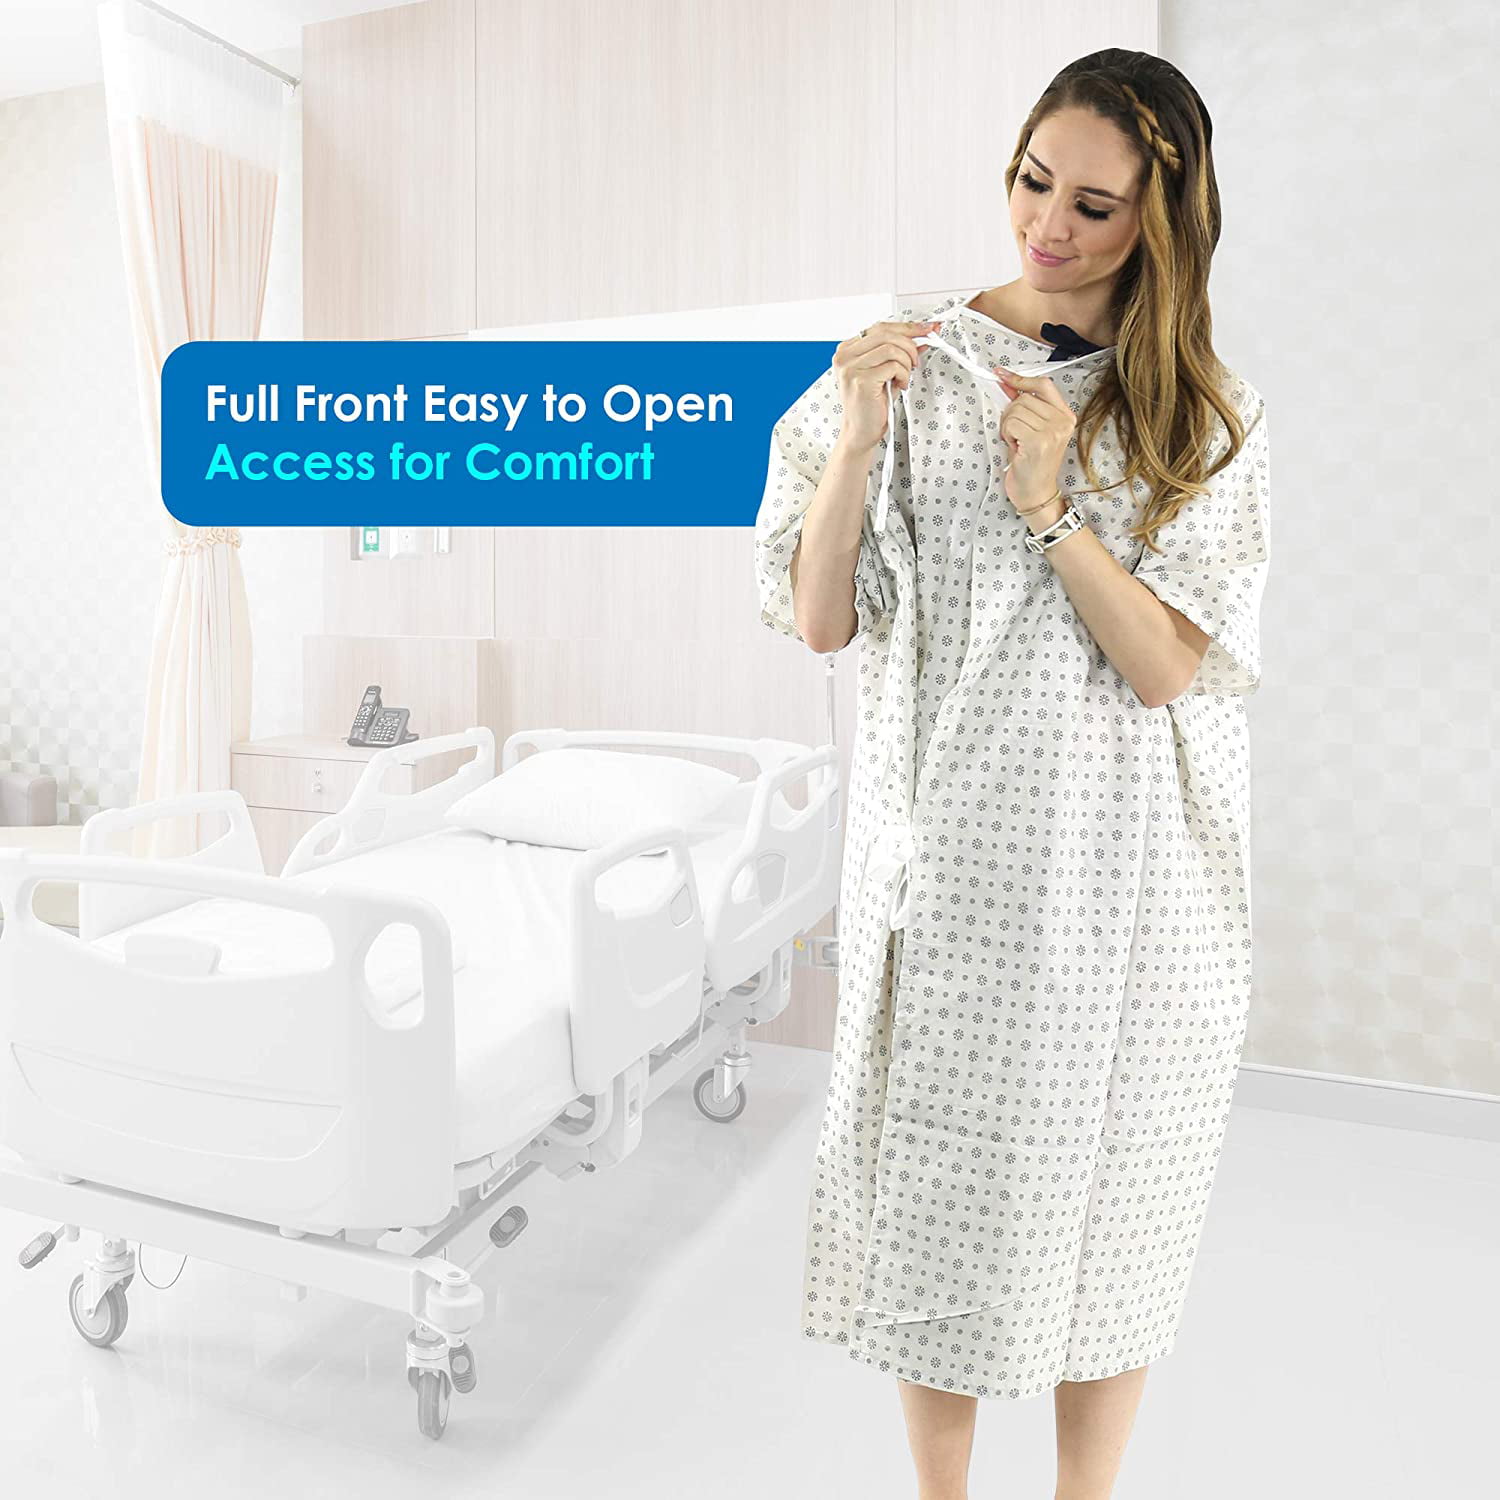 Women's Open Back Adaptive 100% Cotton Flannel Hospital Gown With Snaps -  Plaid Posies XL, Plaid Posies, XL : Buy Online at Best Price in KSA - Souq  is now Amazon.sa: Fashion